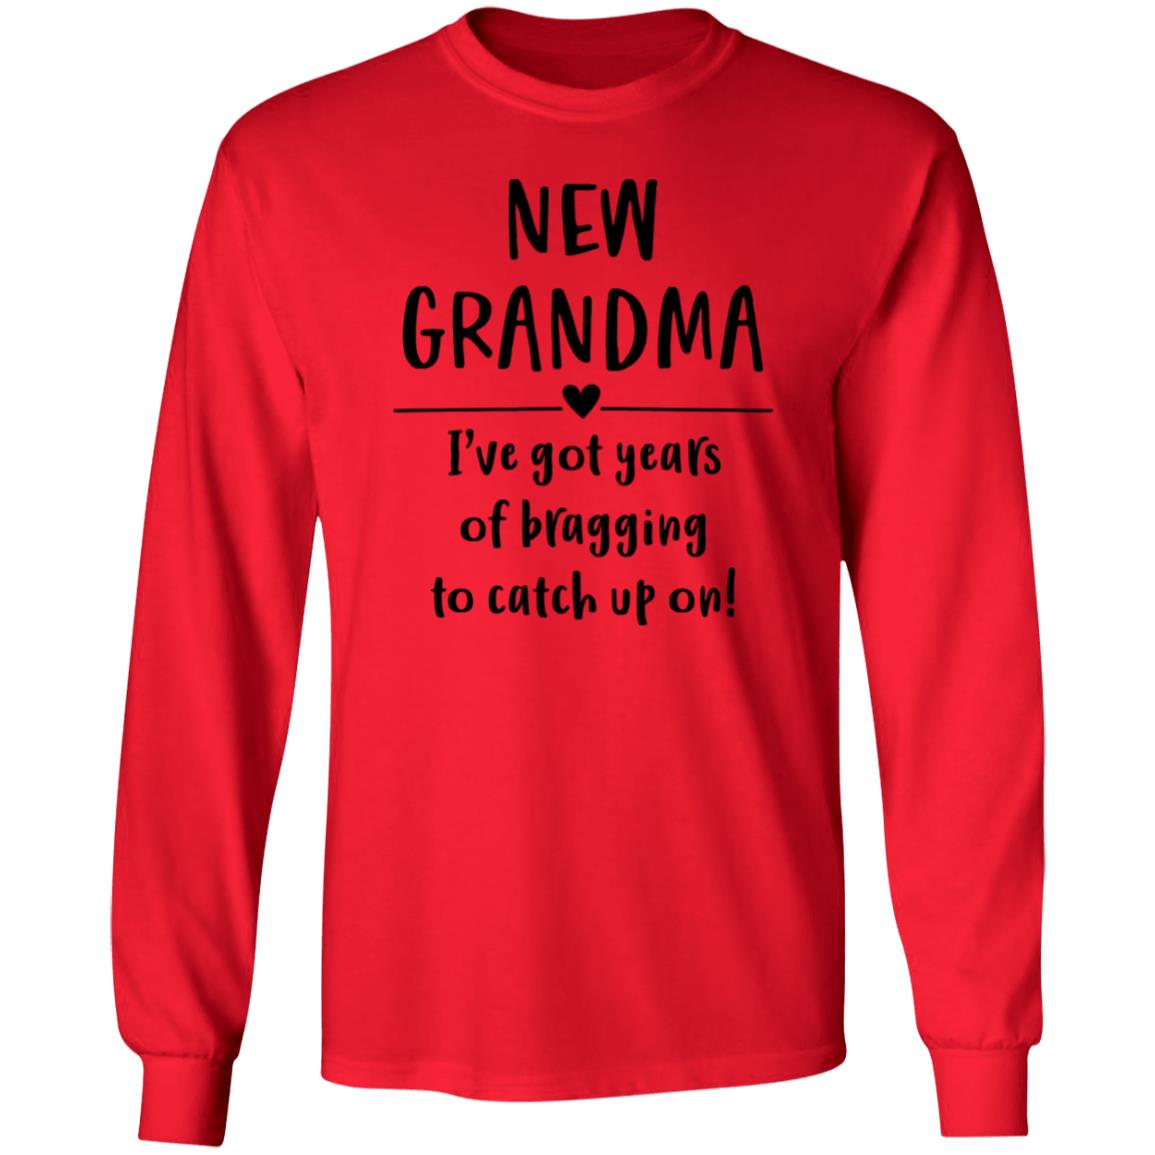 New Grandma T-Shirts with Short or Long Sleeve